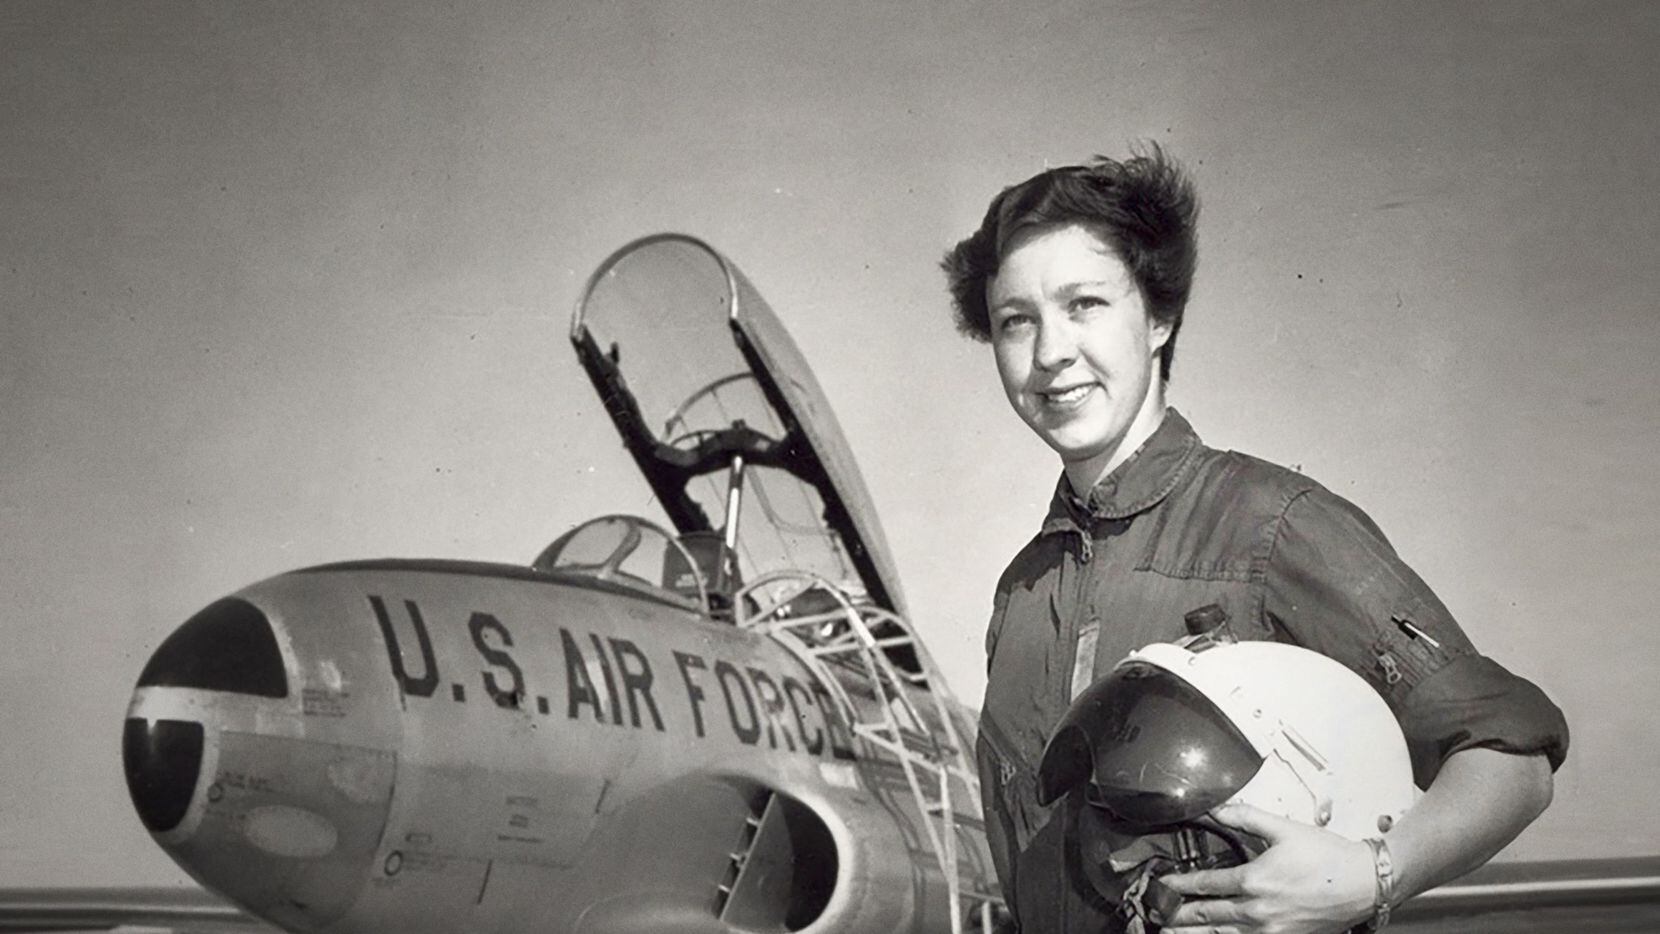 Wally Funk, a 82-year-old woman pilot, will join Jeff Bezos in traveling to space this month...